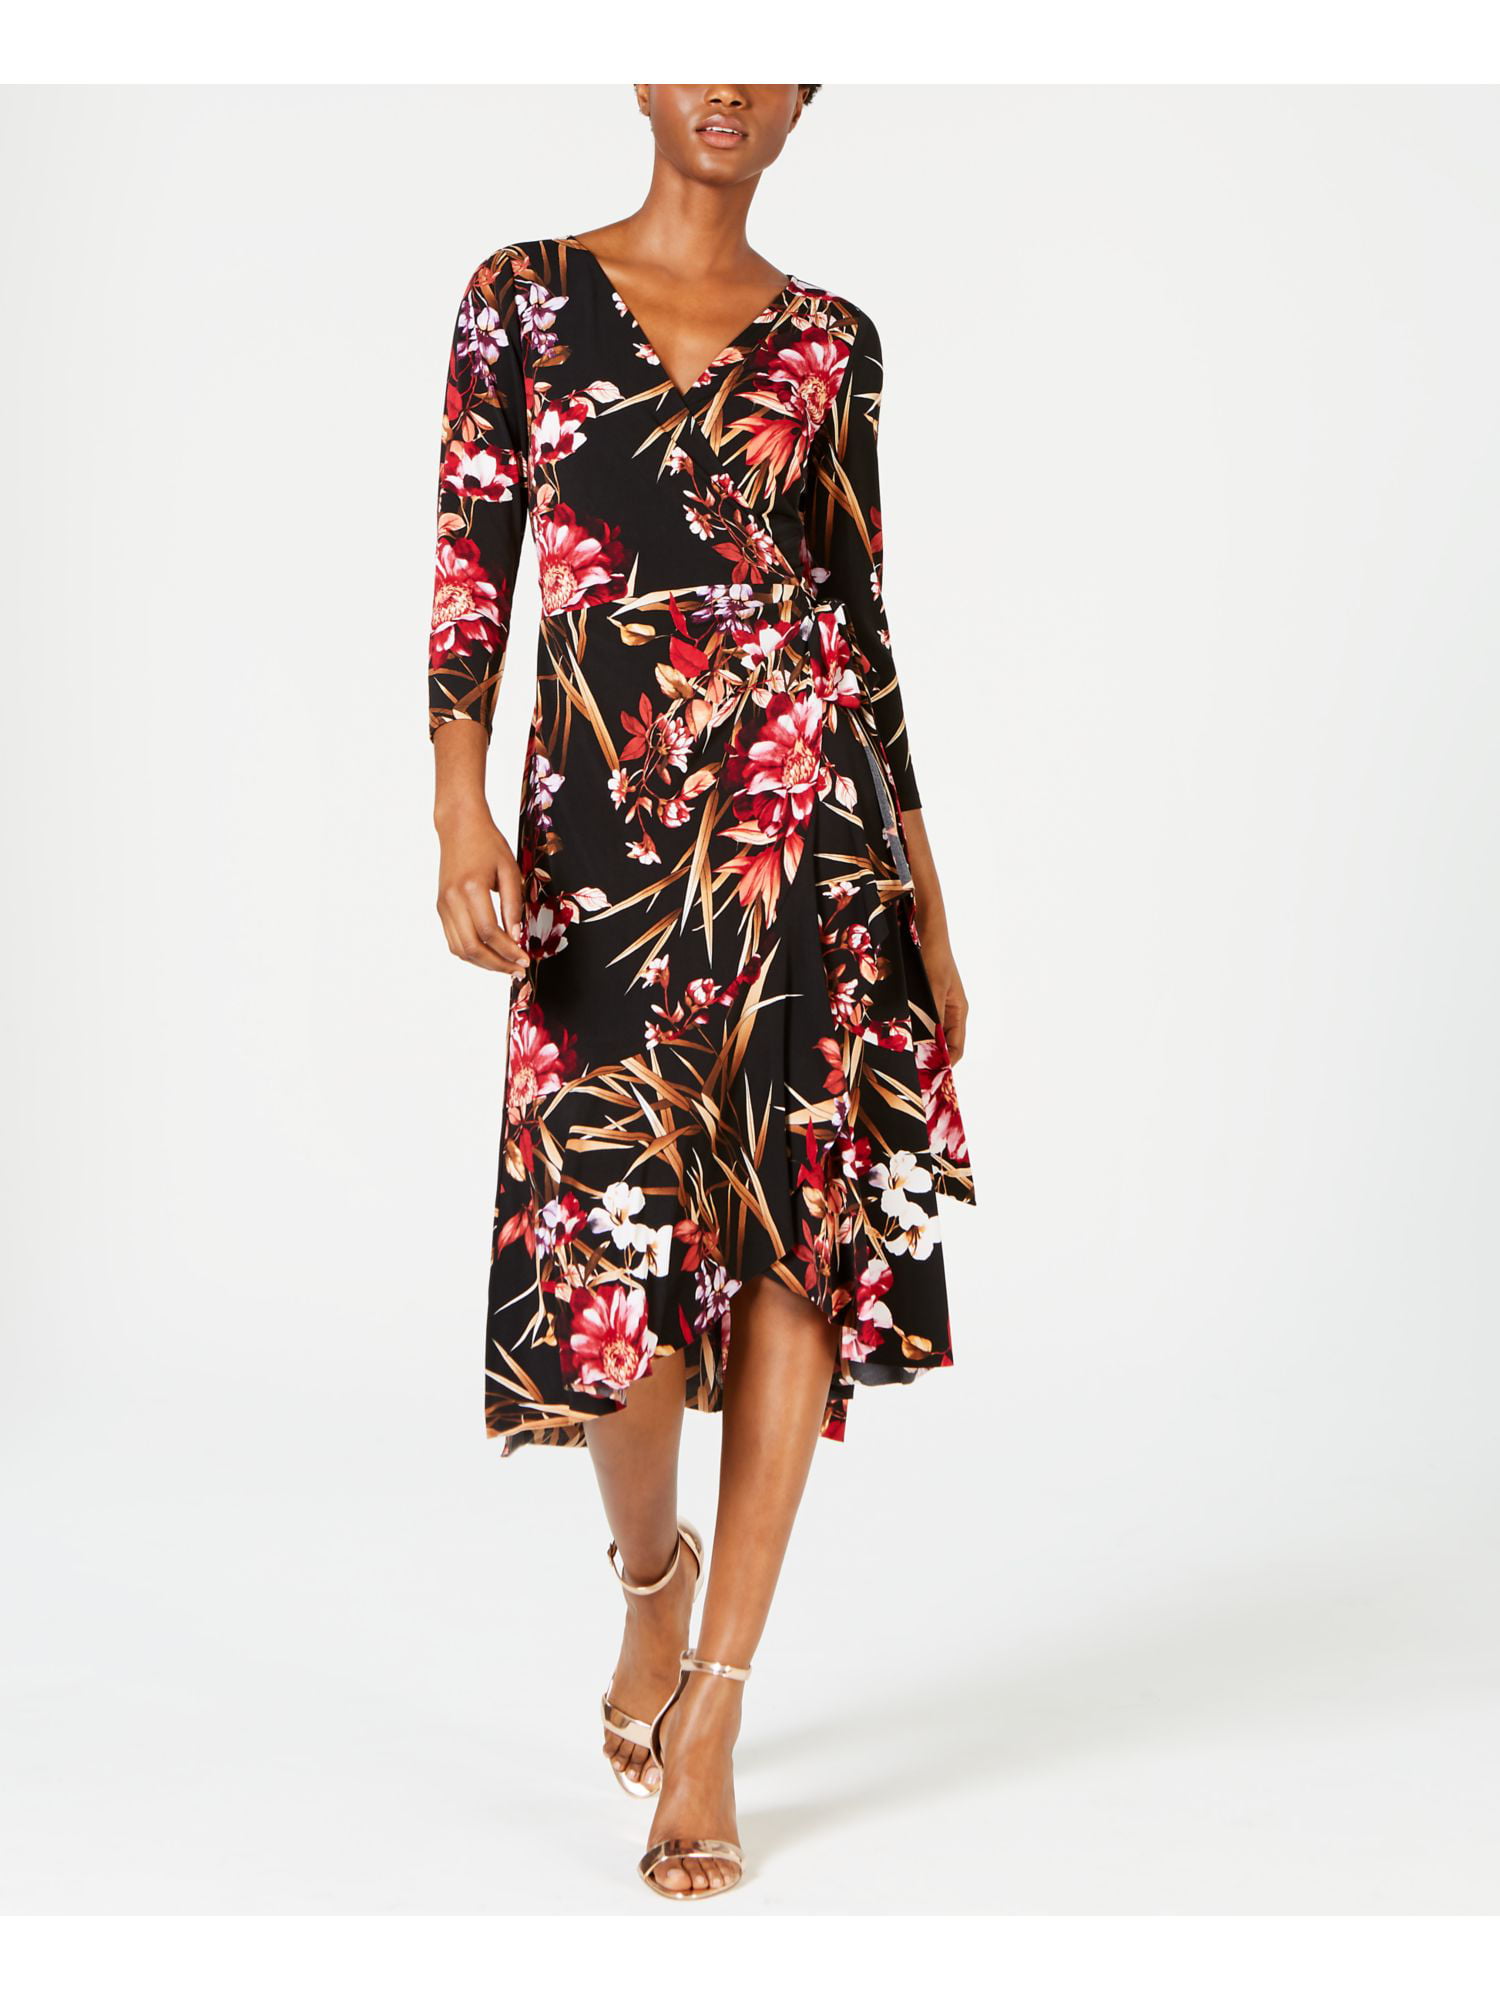 CONNECTED APPAREL Womens Black Floral 3/4 Sleeve Midi Wrap Dress Size